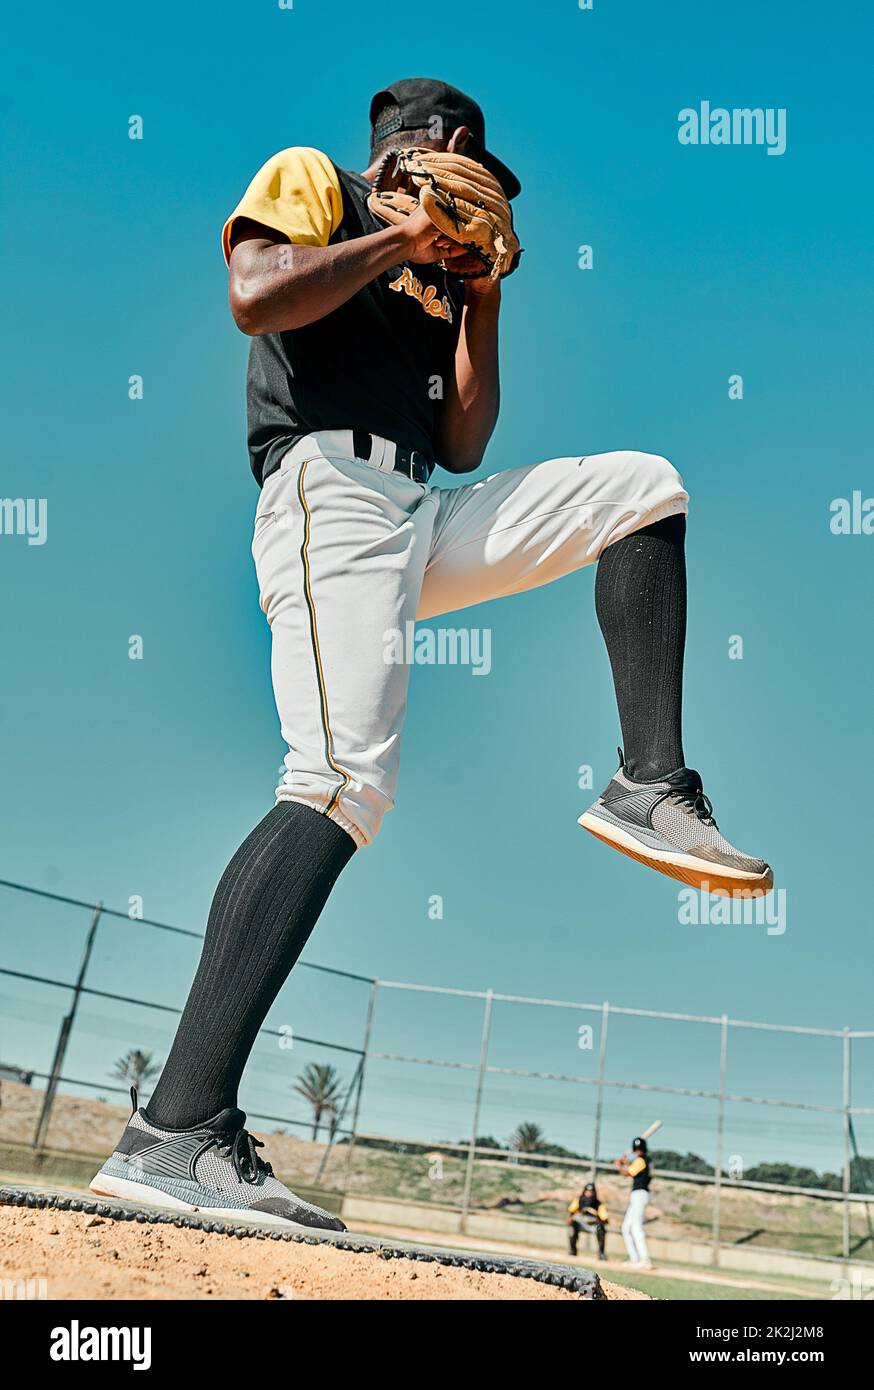 Hes giving it all hes got. Shot of a young baseball player getting ready to pitch the ball during a game outdoors. Stock Photo